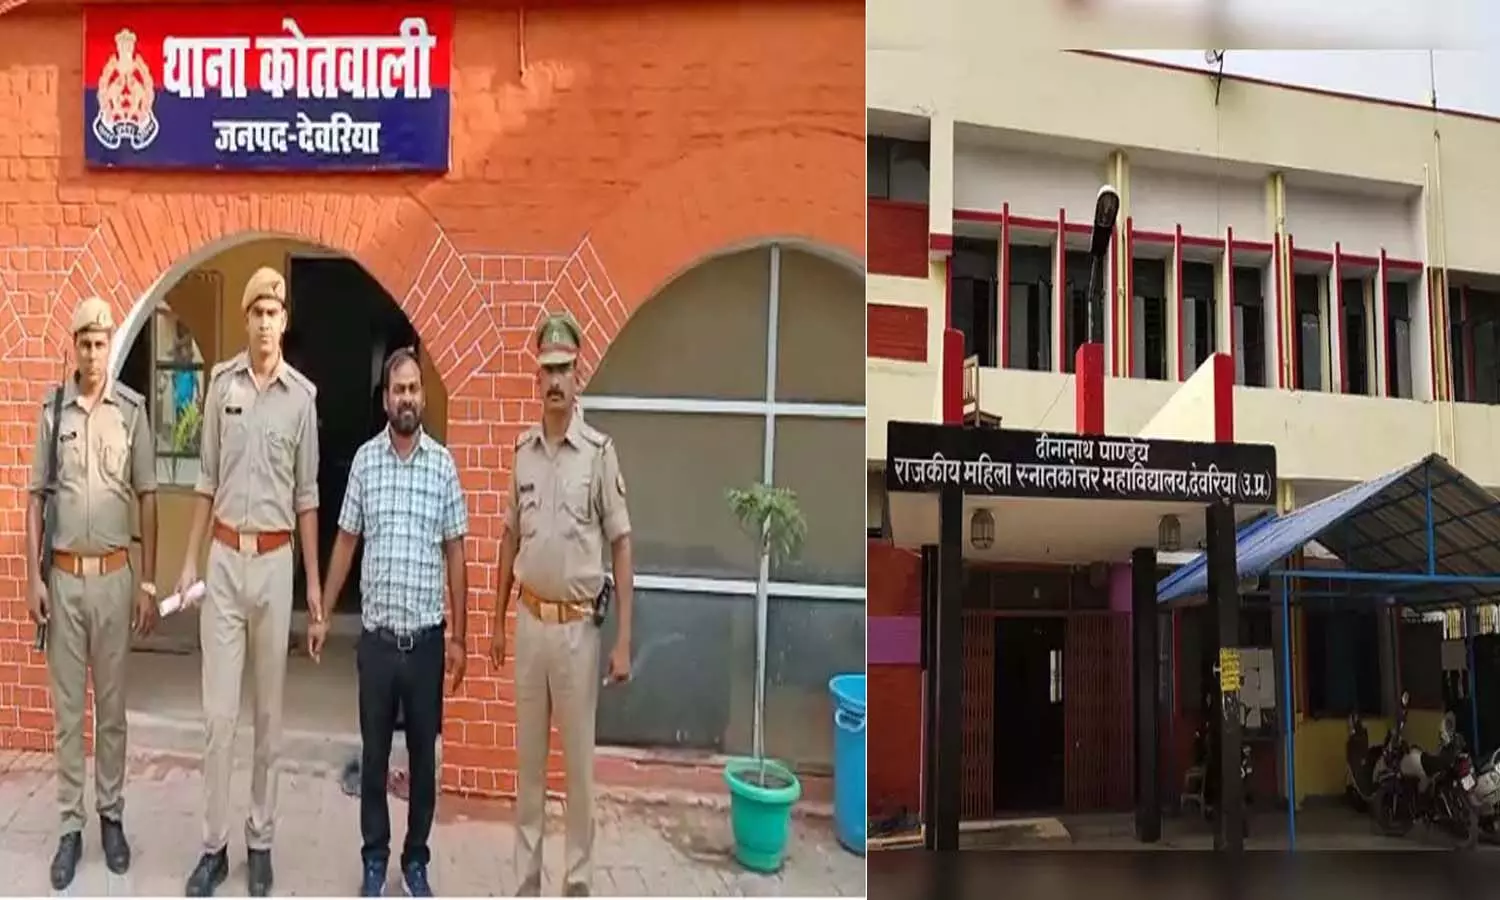 Police arrested the principal who molested girl students in Deoria